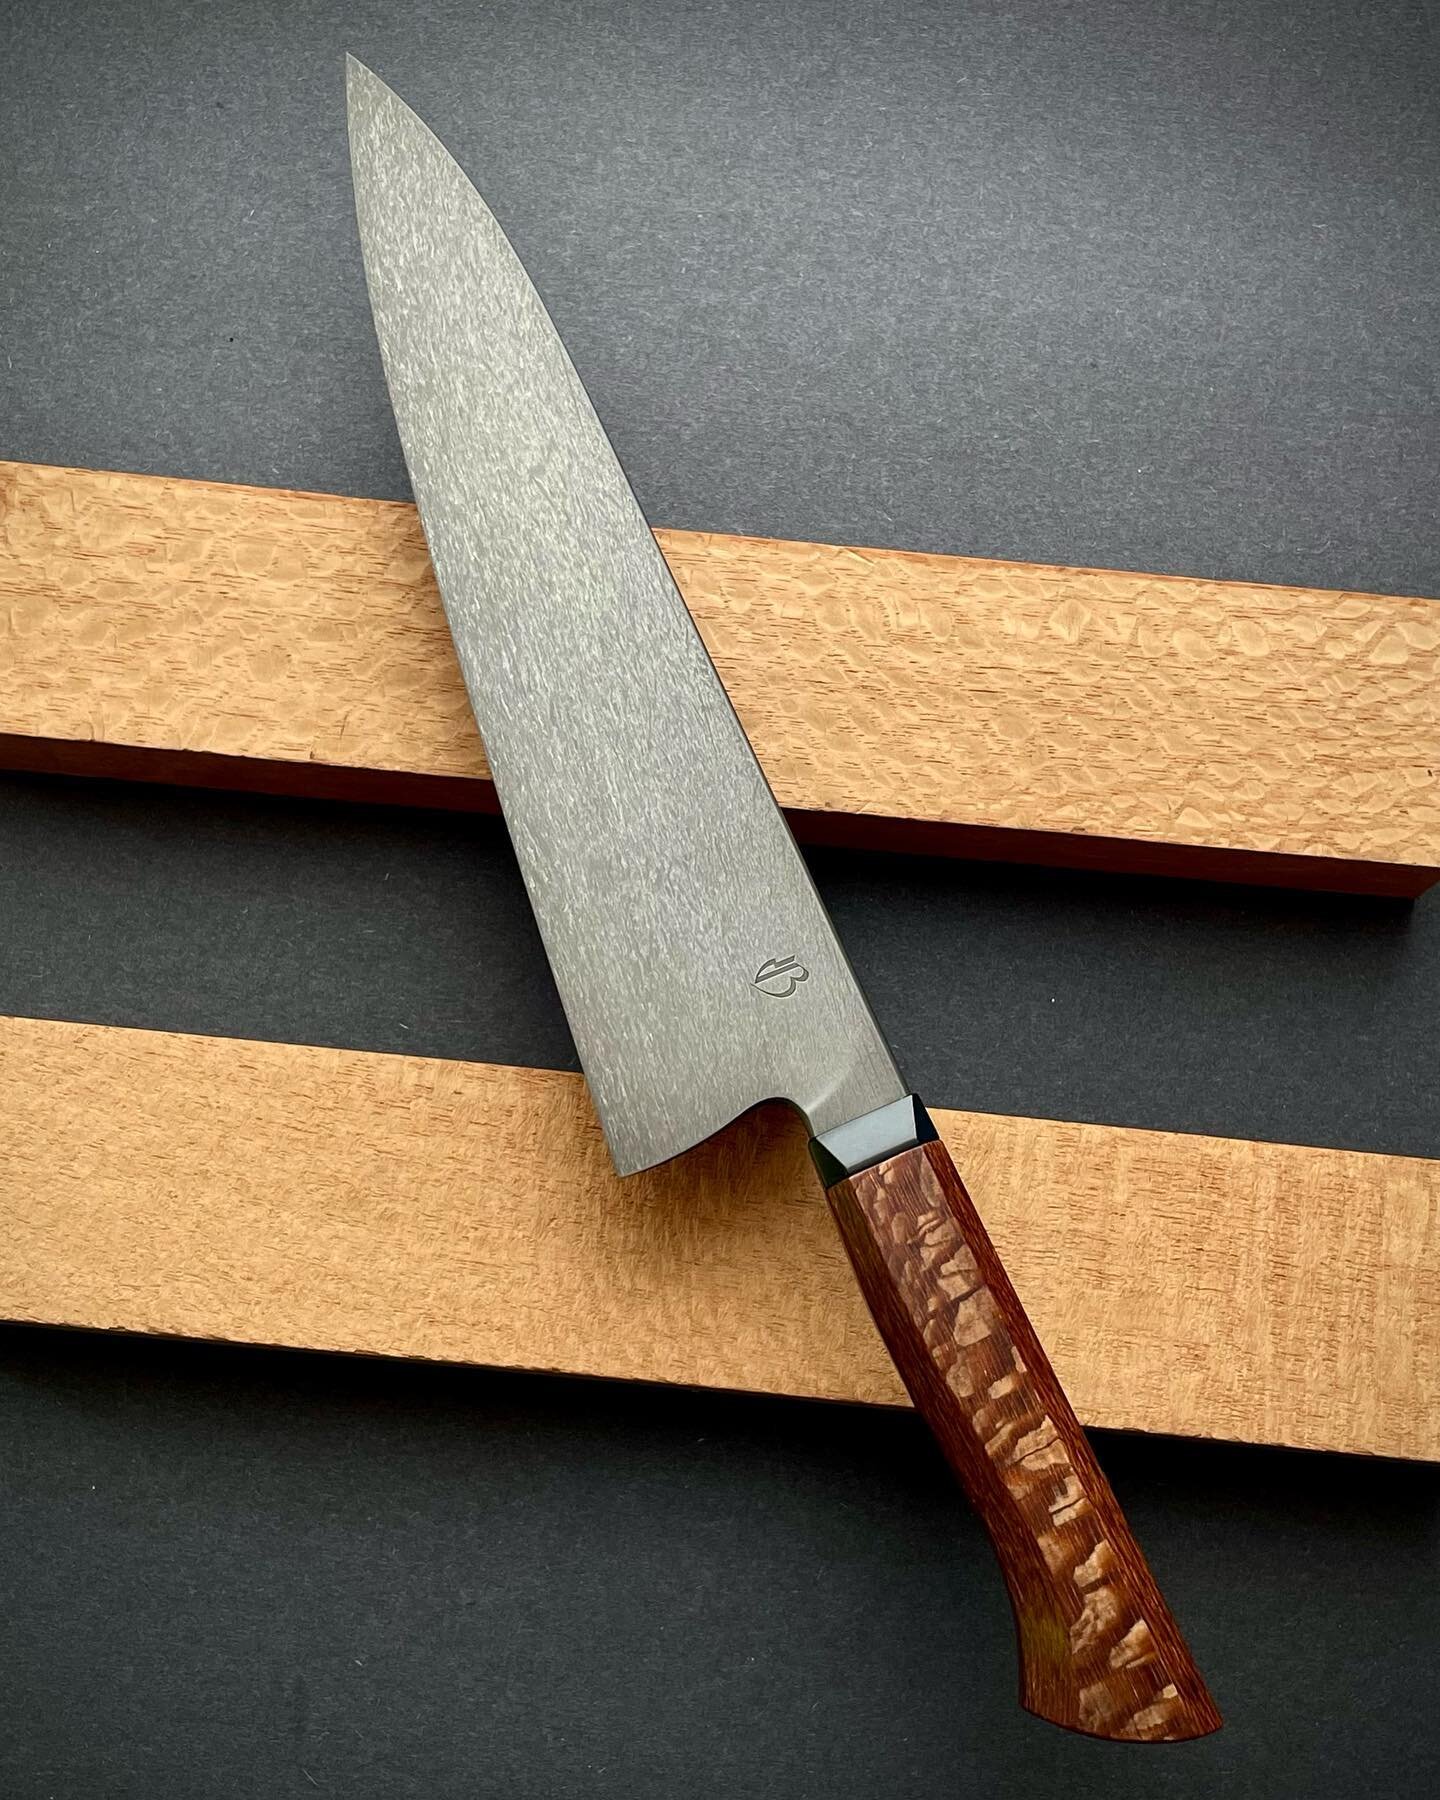 245mm B-grind gyuto, handle is Lacewood with an heirloom fit micarta bolster. This one is being sold through my newsletter right now, if you missed it you can go to my website and sign up to have a chance at available pieces in the future.
&bull;
#ch